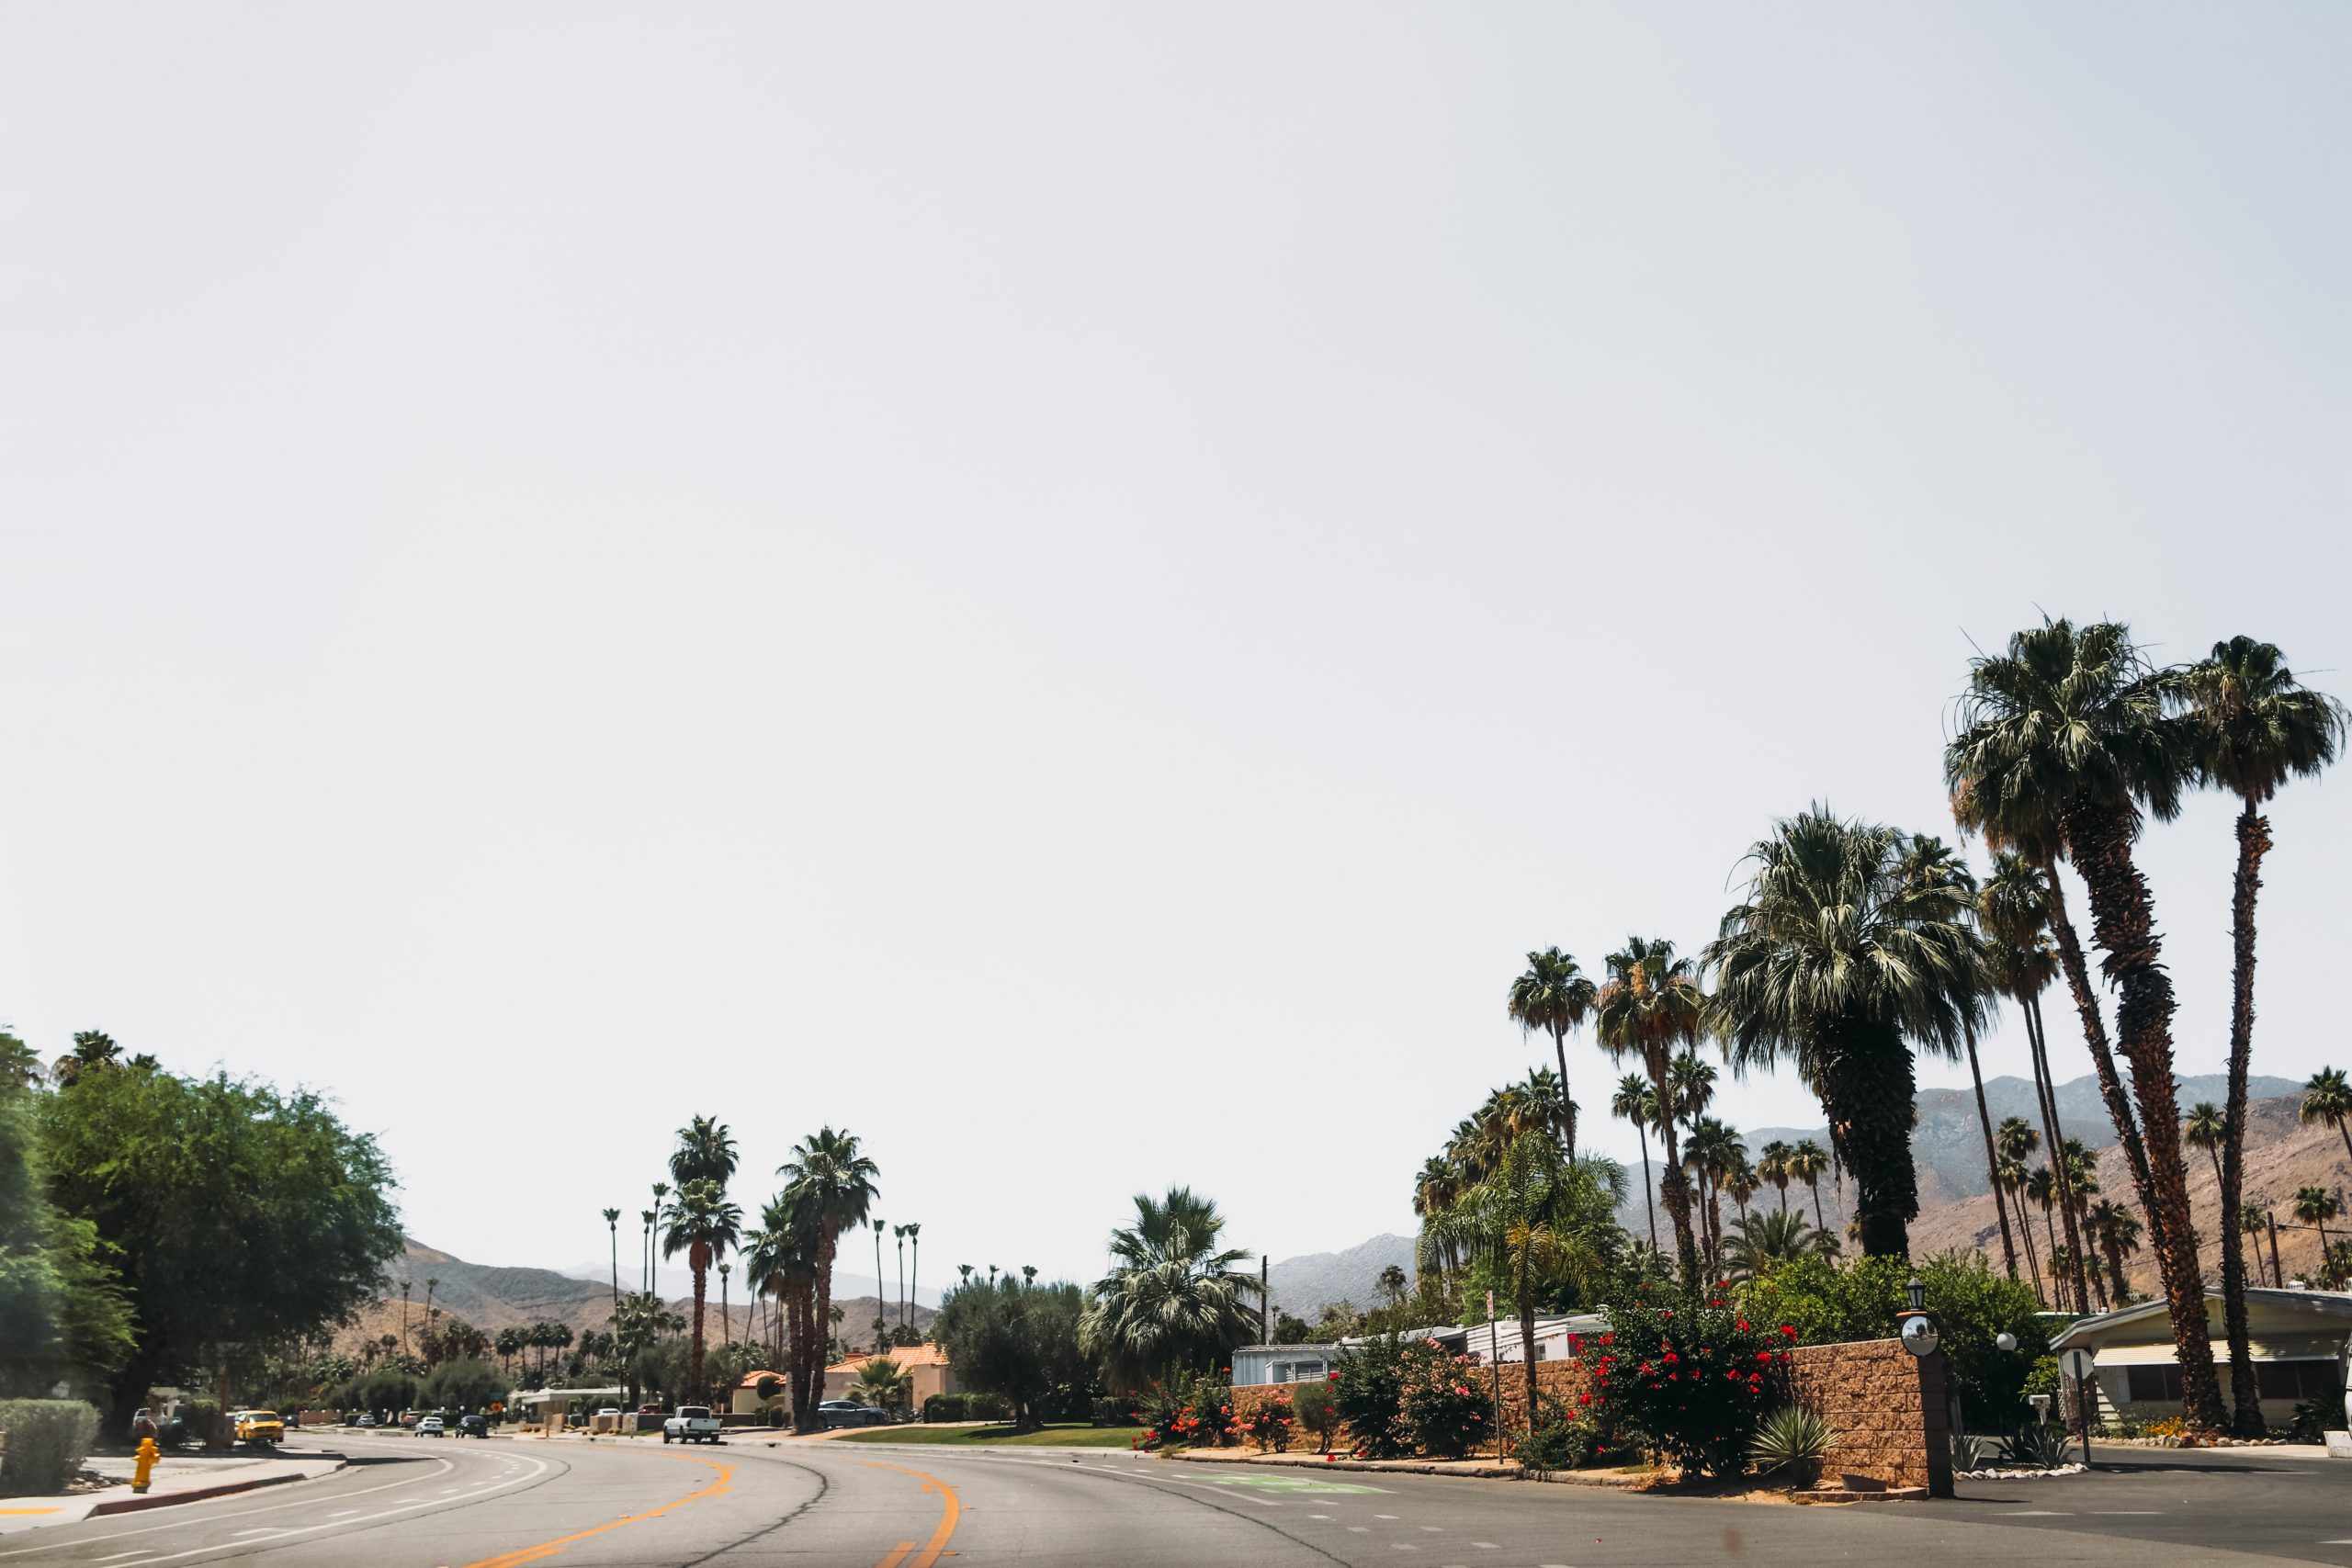 How to get to Palm Springs from LA